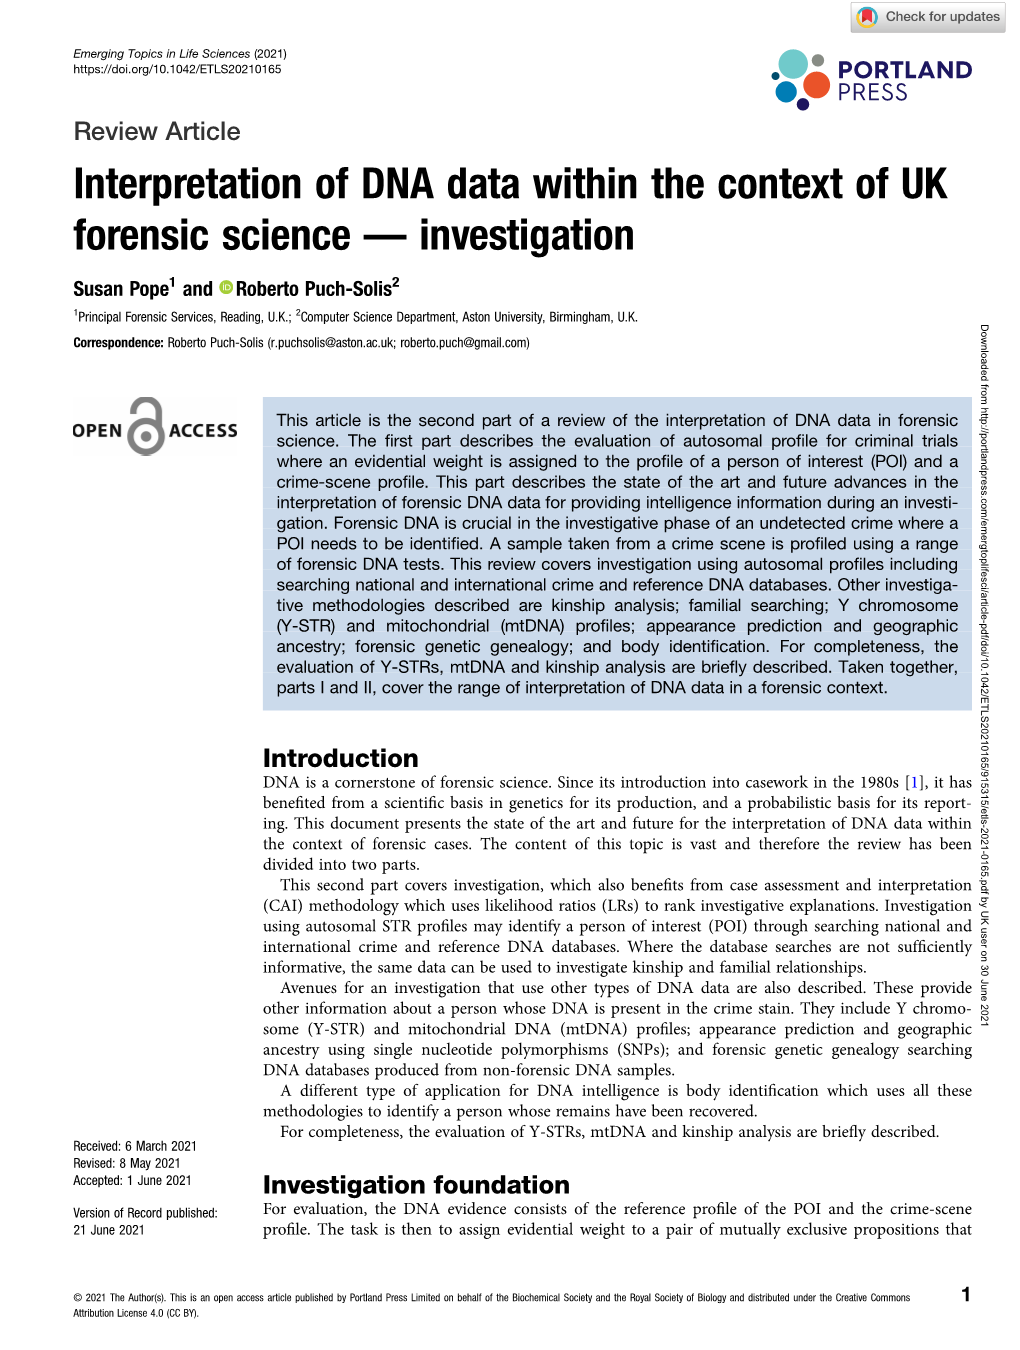 Interpretation of DNA Data Within the Context of UK Forensic Science — Investigation